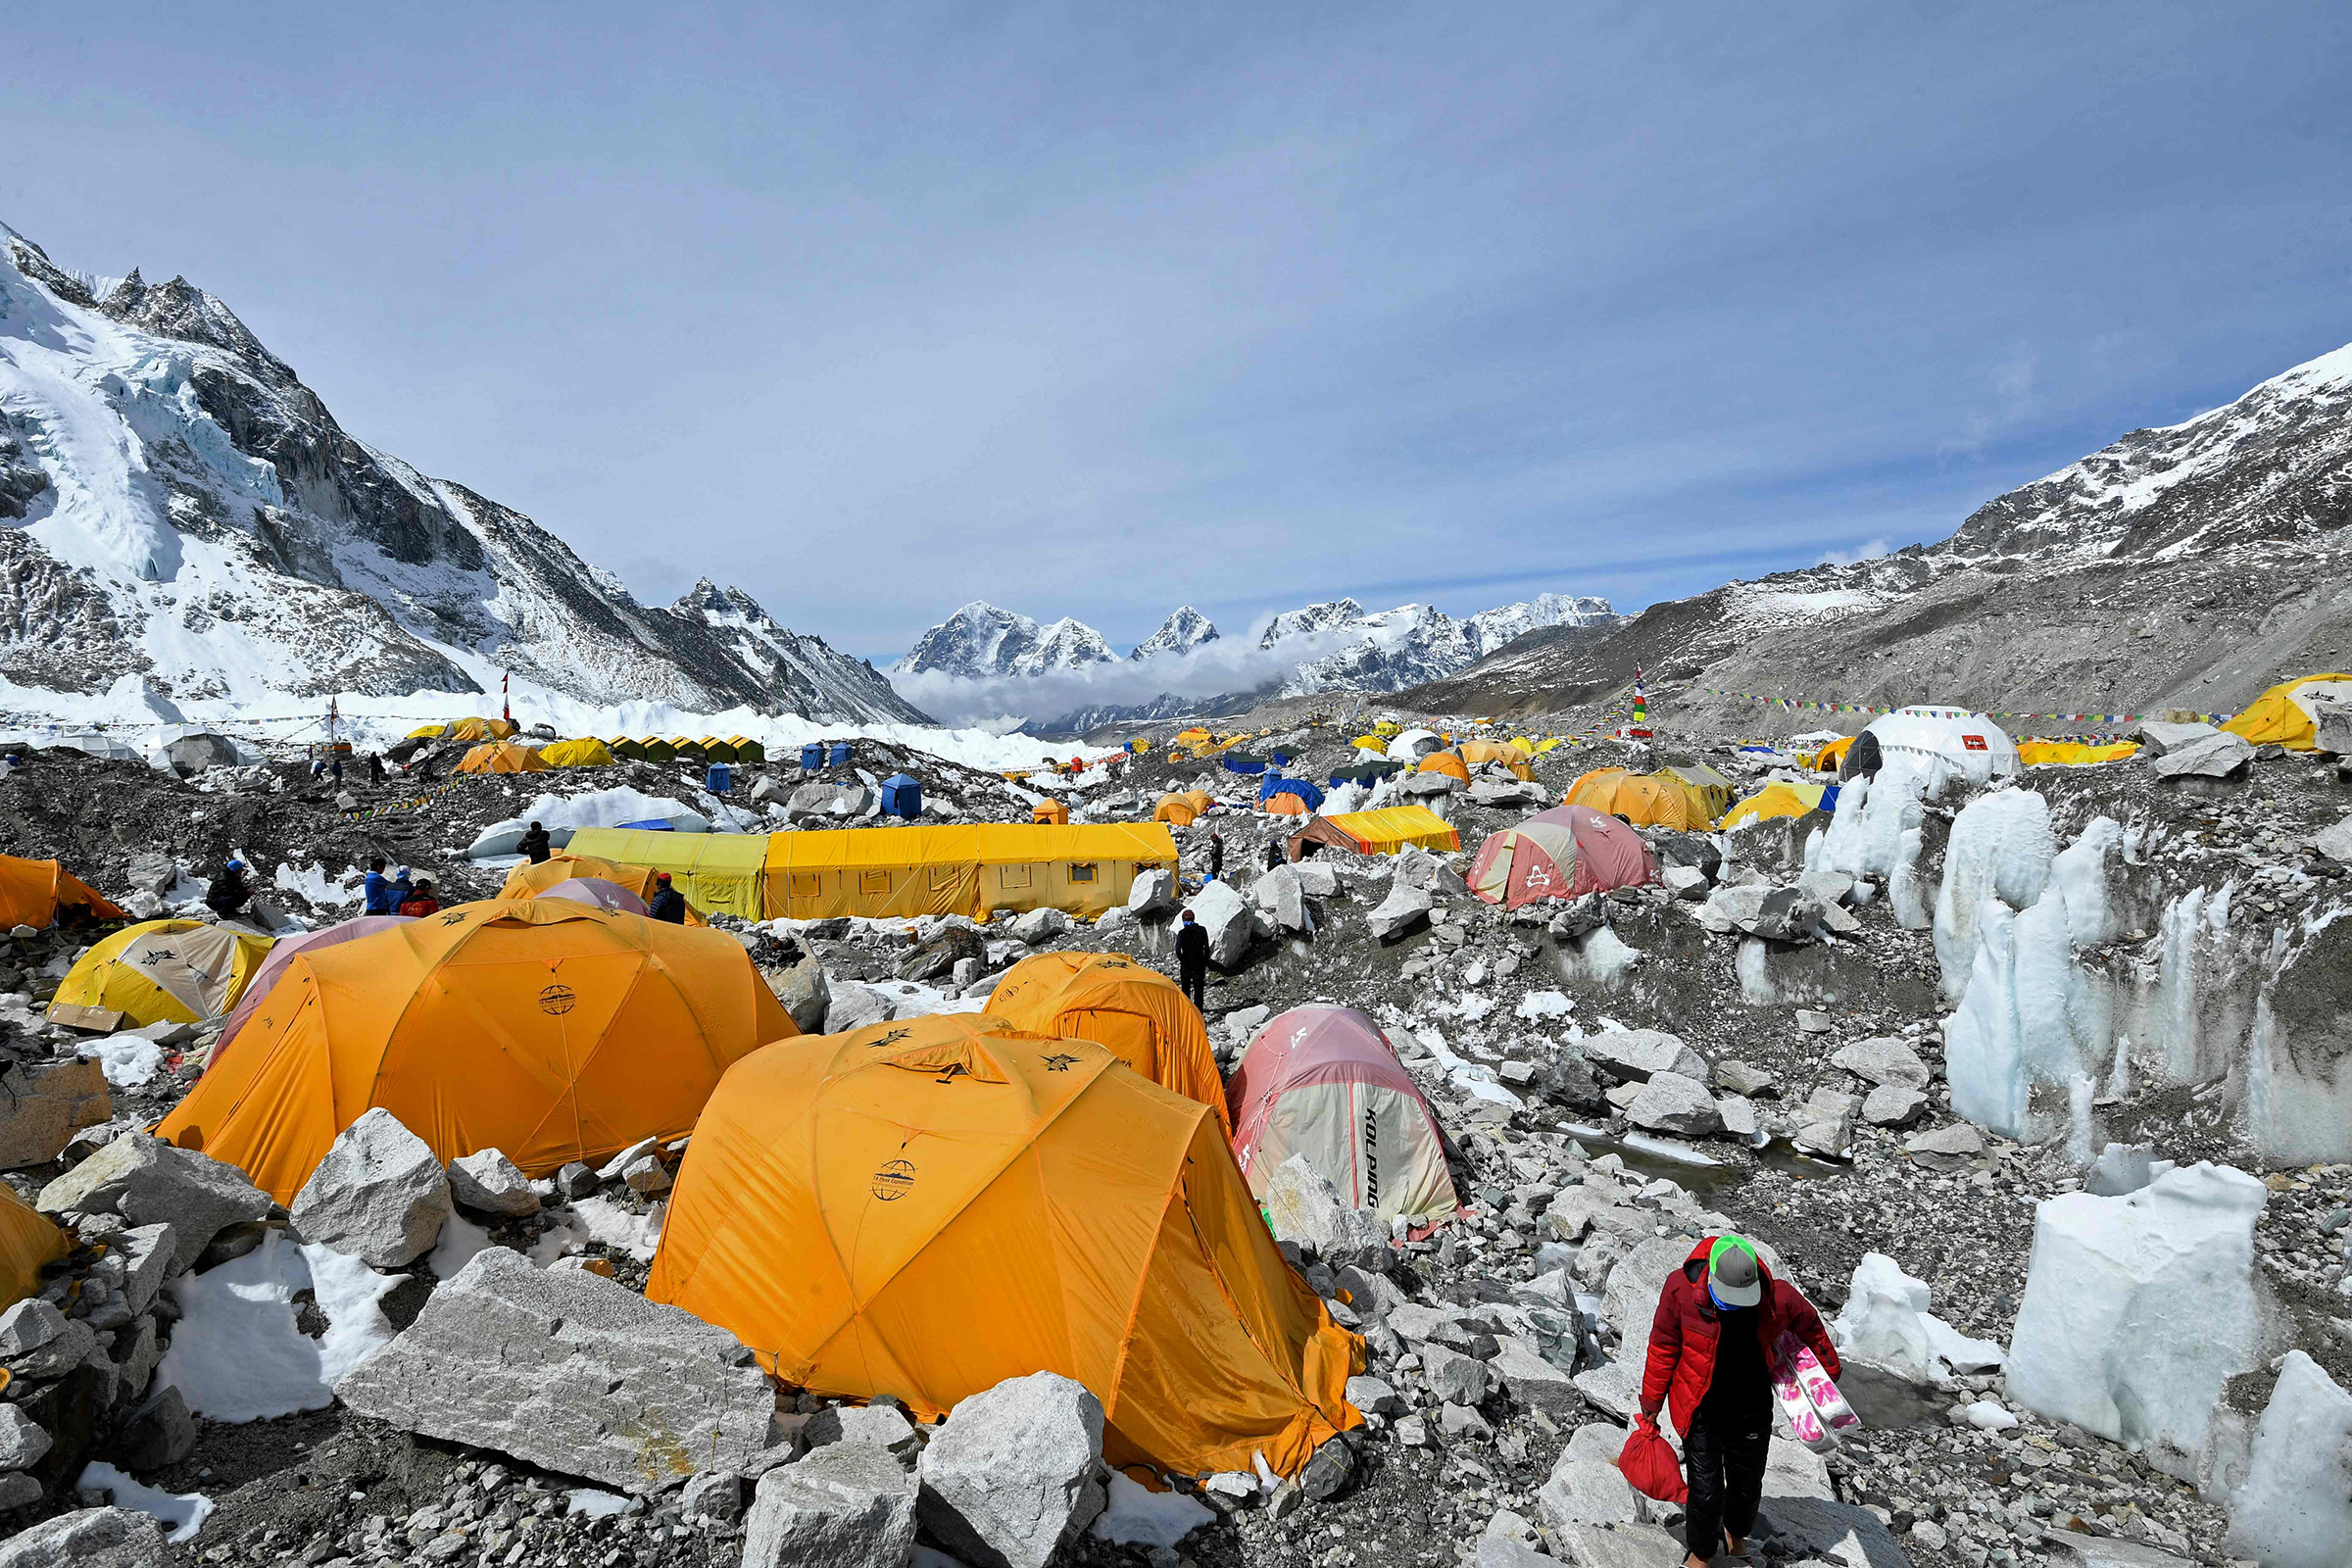 Tents of mountaineers are pictured at the Everest base camp in Solukhumbu district, Nepal, on May 3